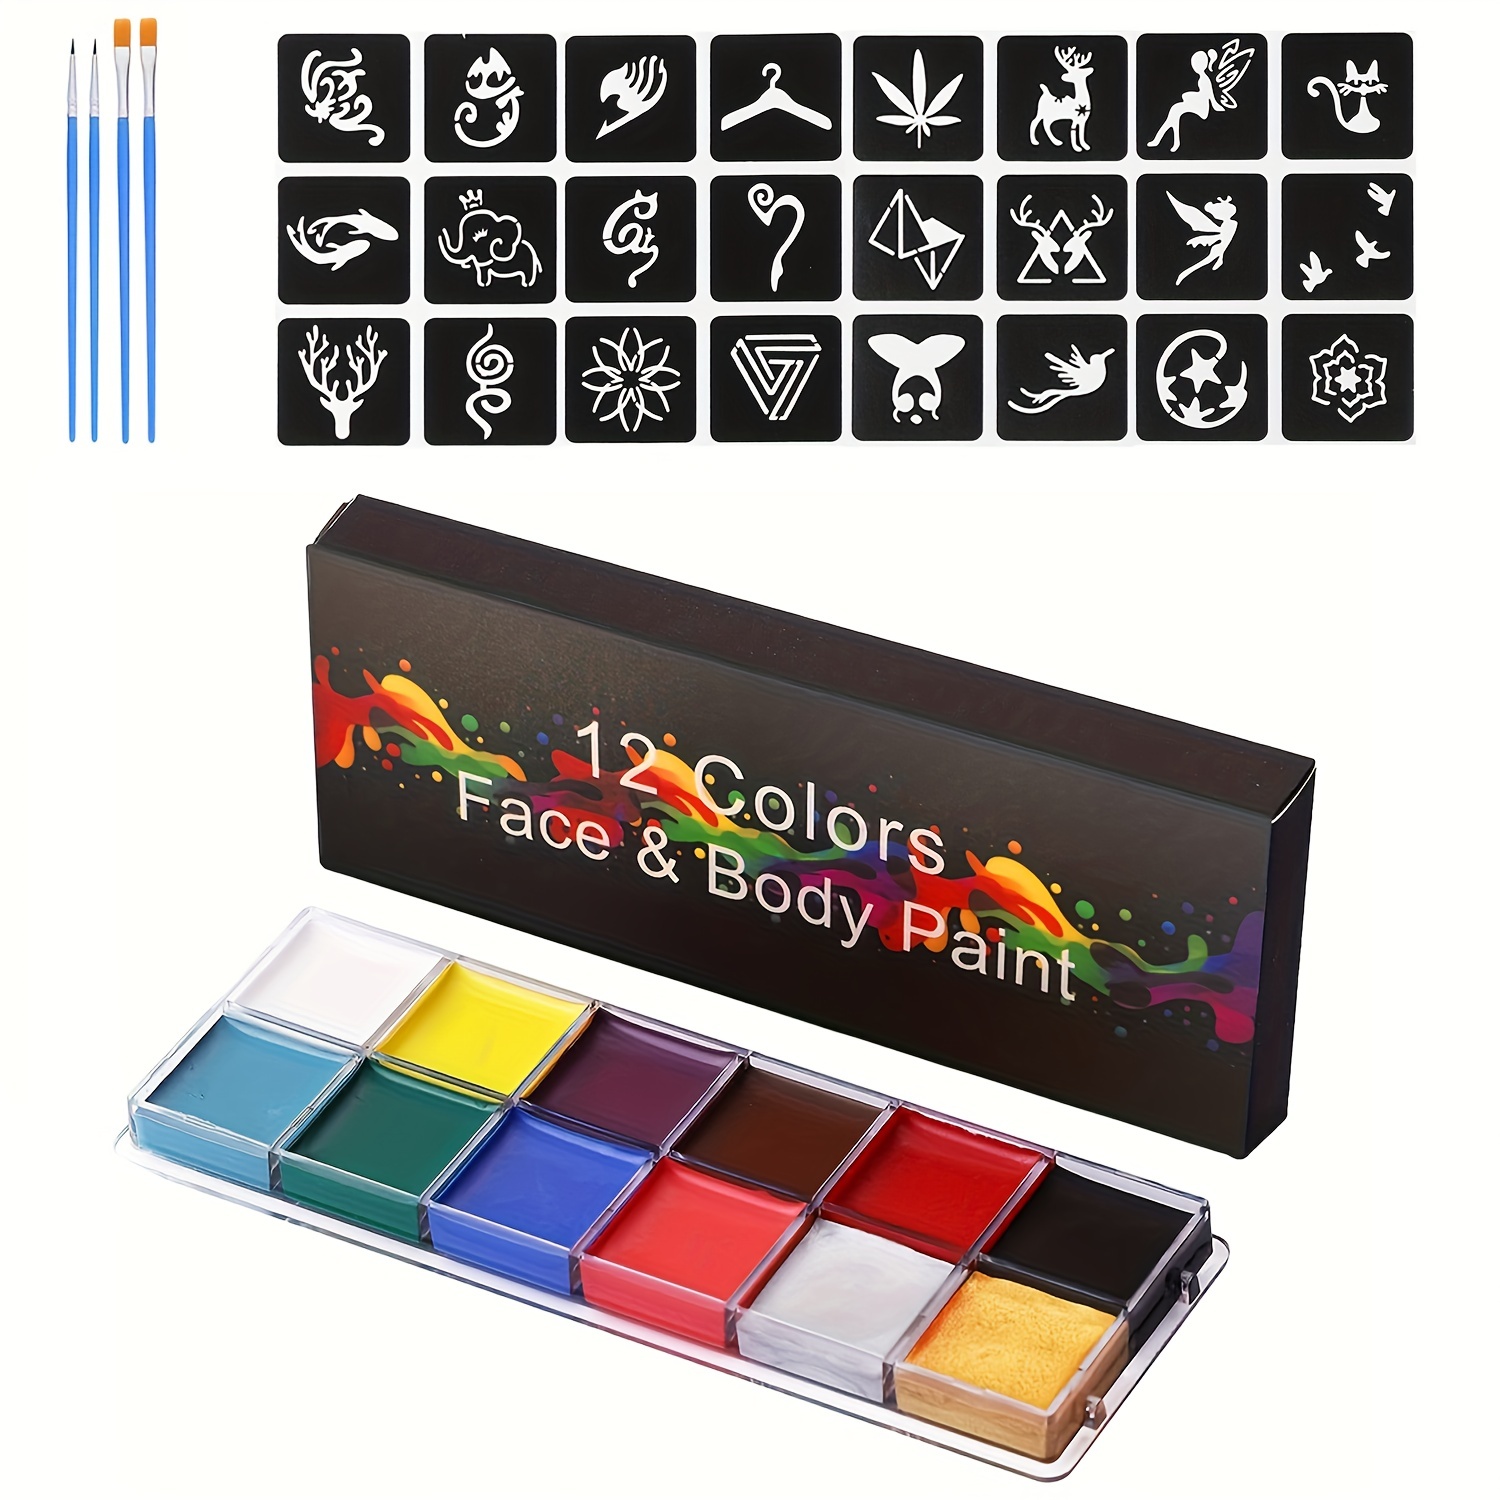 Face Painting Kit For Kids With Stancils, 15 Colors Water Activated Body  Paints Makeup Palette, Hypoallergenic Washable Safe & Non-toxic, Easy To  Pain